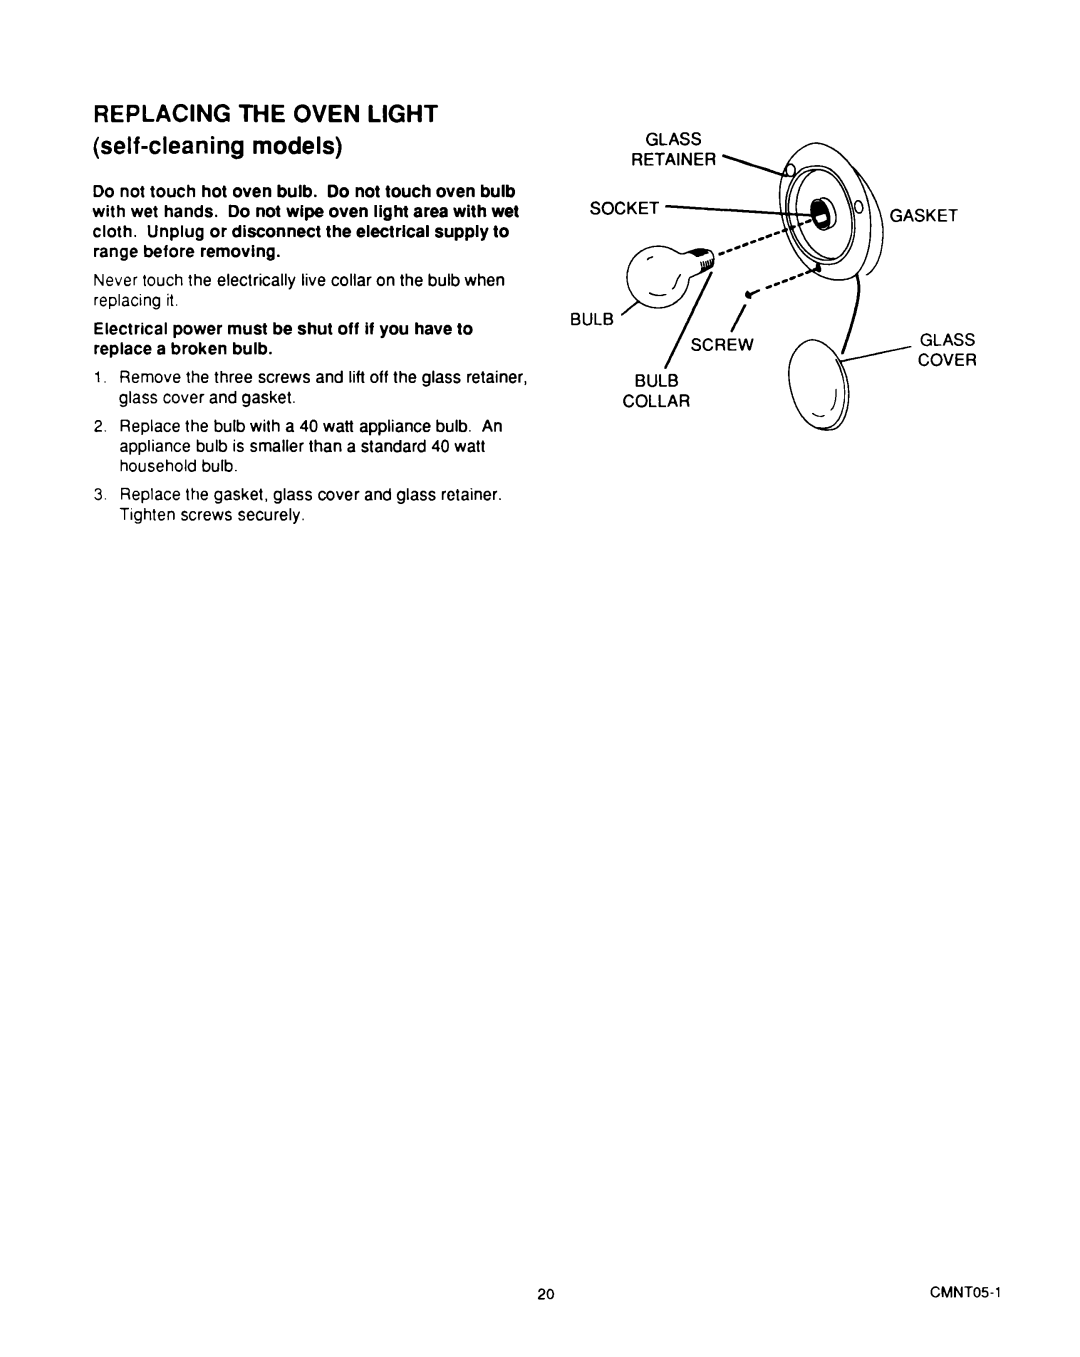 Roper D975 owner manual REPLACING THE OVEN LIGHT self-cleaningmodels 